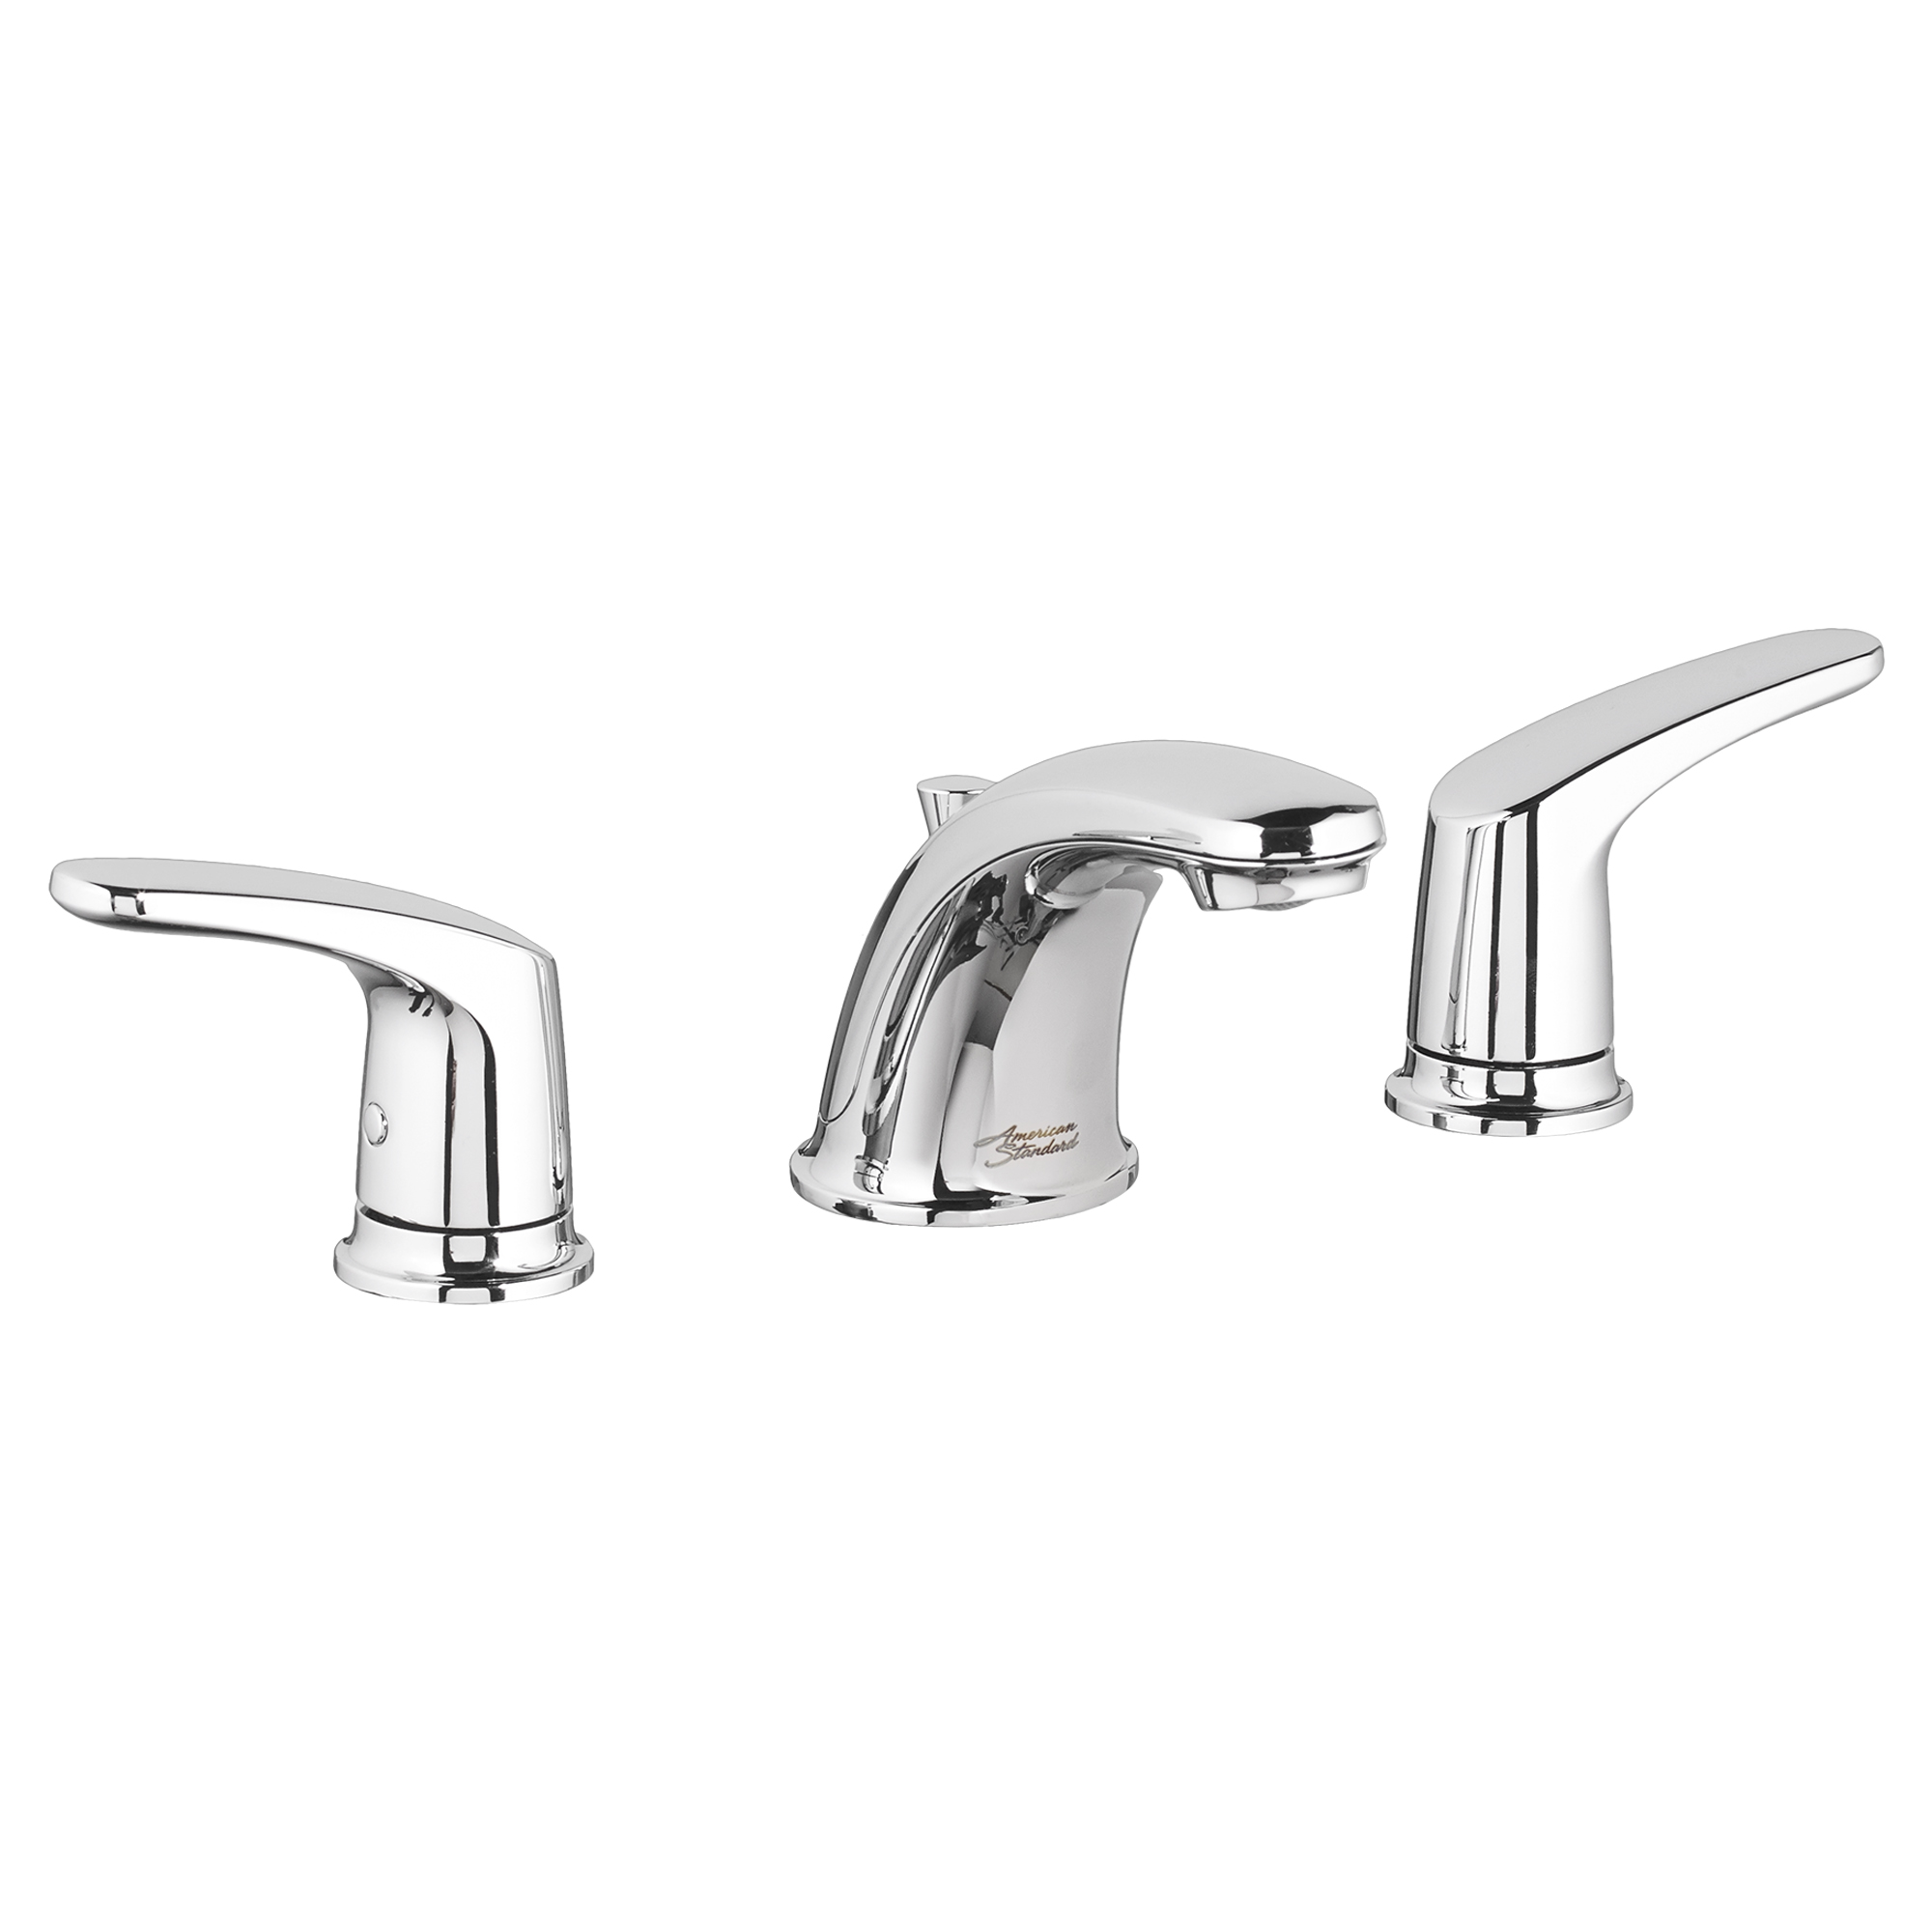 Colony™ PRO 8-Inch Widespread 2-Handle Bathroom Faucet 1.2 gpm/4.5 L/min With Lever Handles